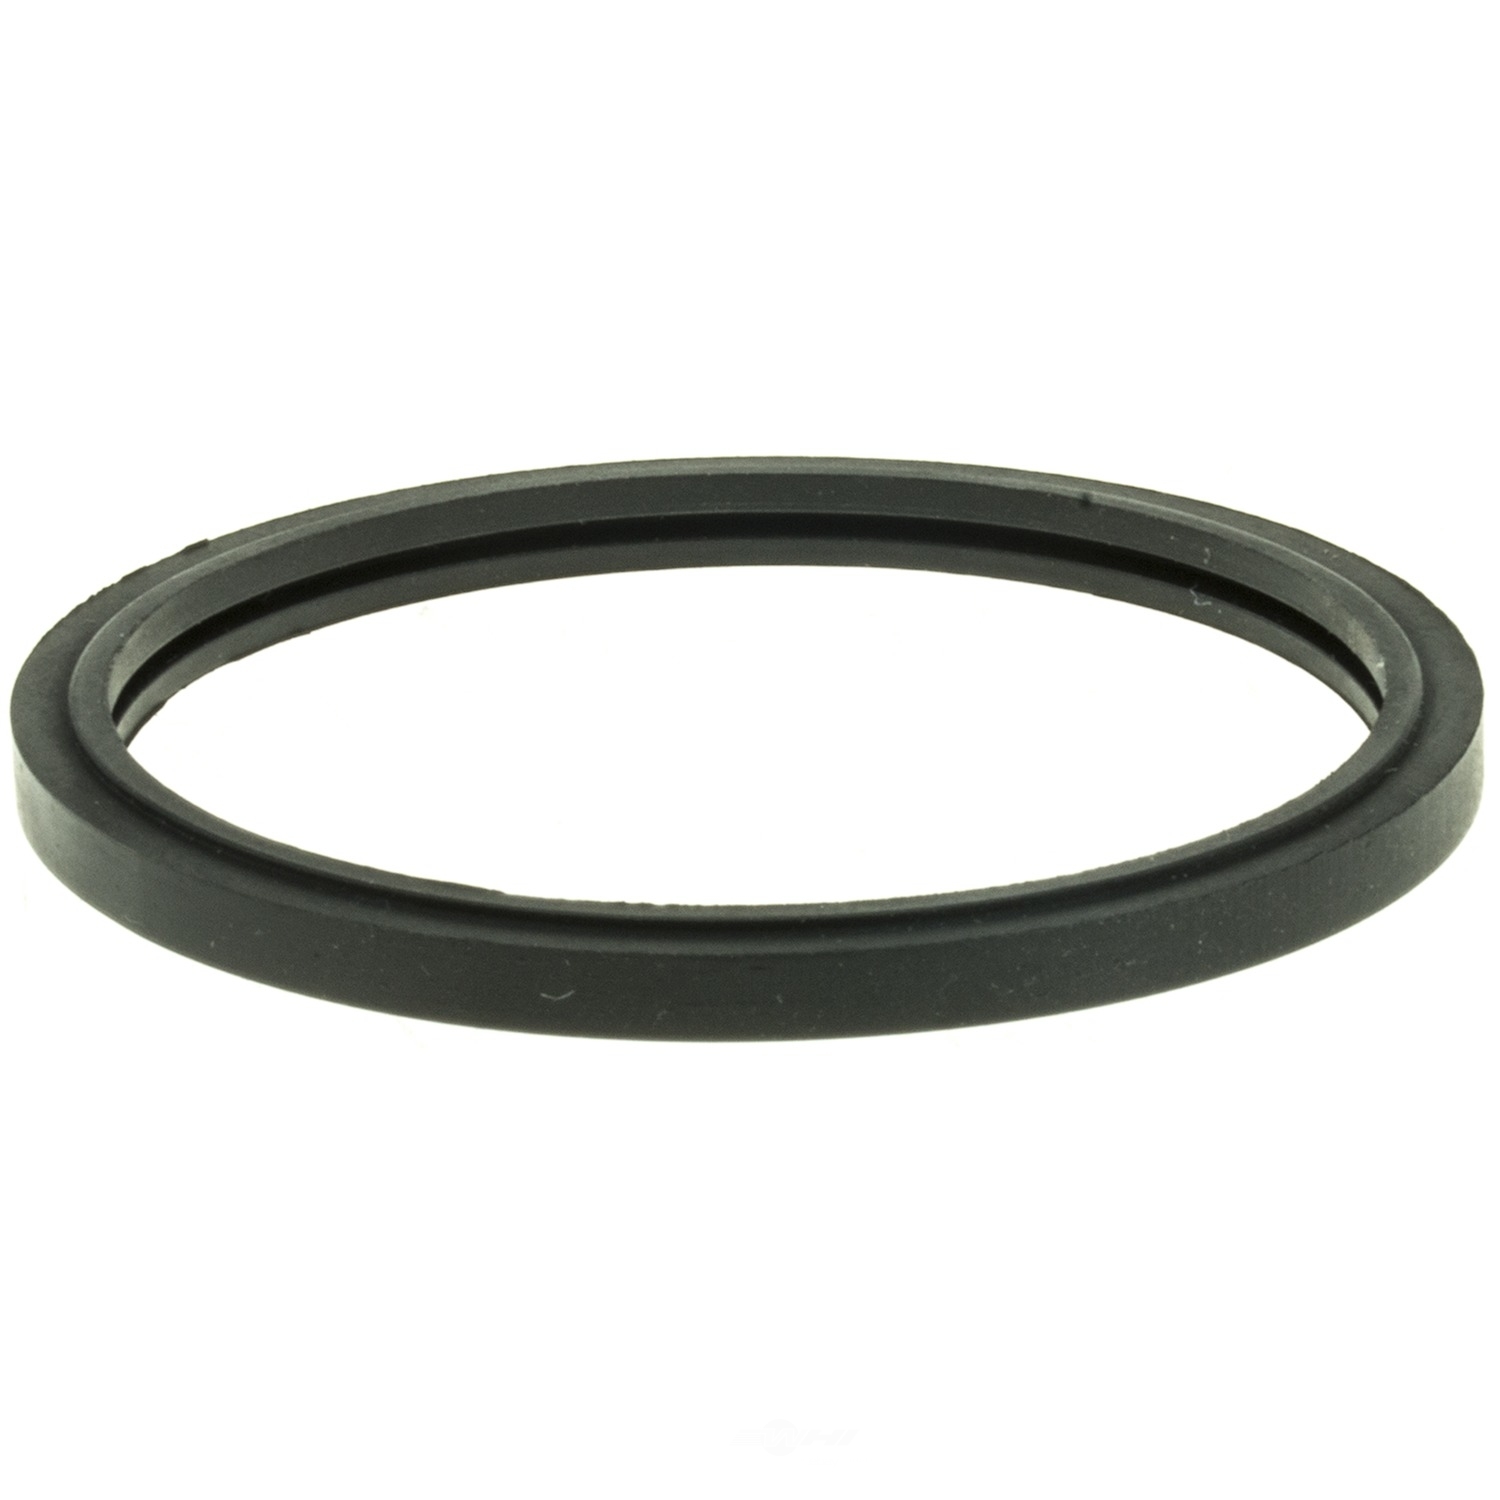 STANT - Thermostat Seal - STN 27282